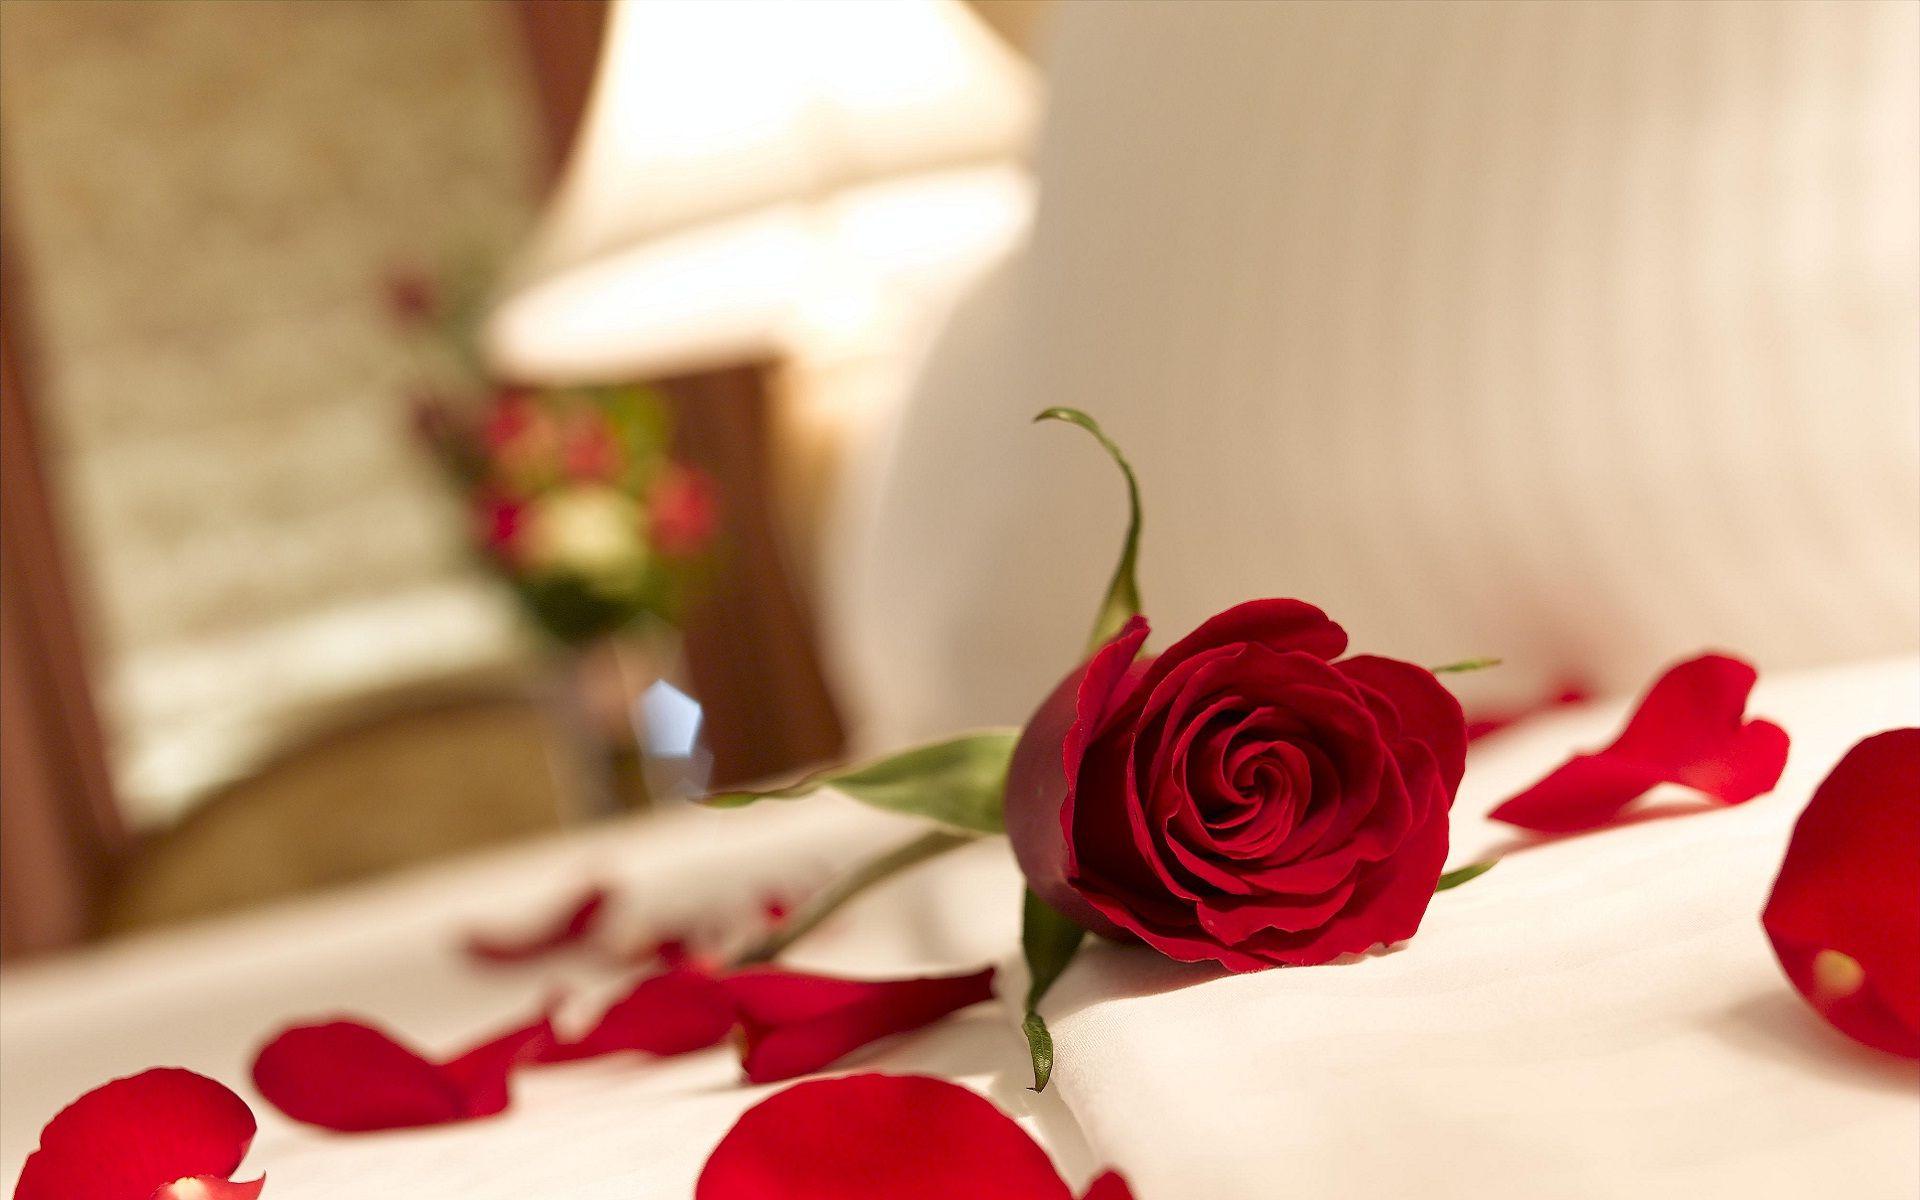 Red roses and petals love wallpapers.